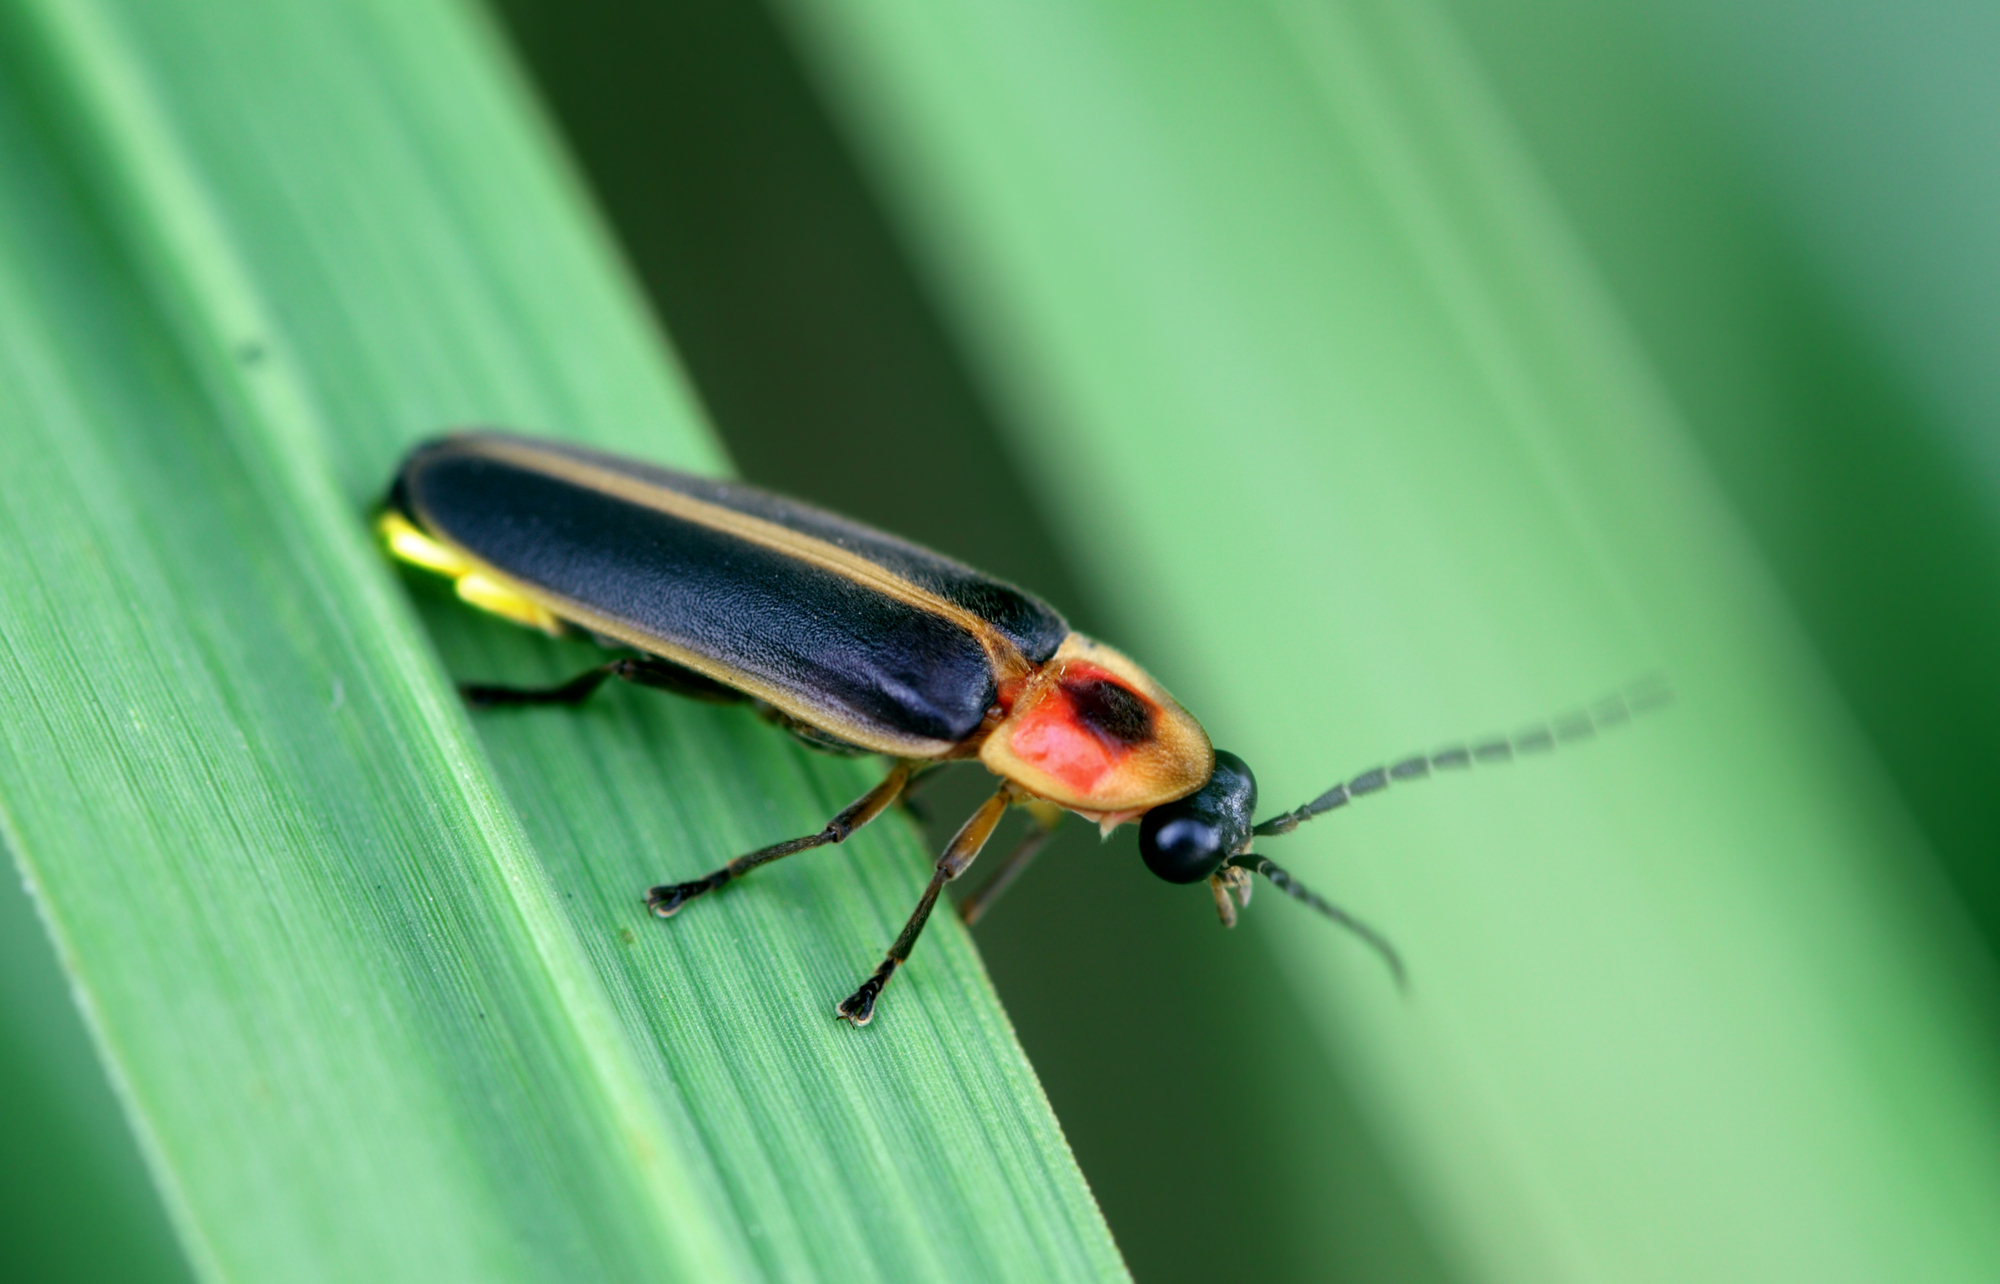 Humans are putting fireflies at risk of extinction